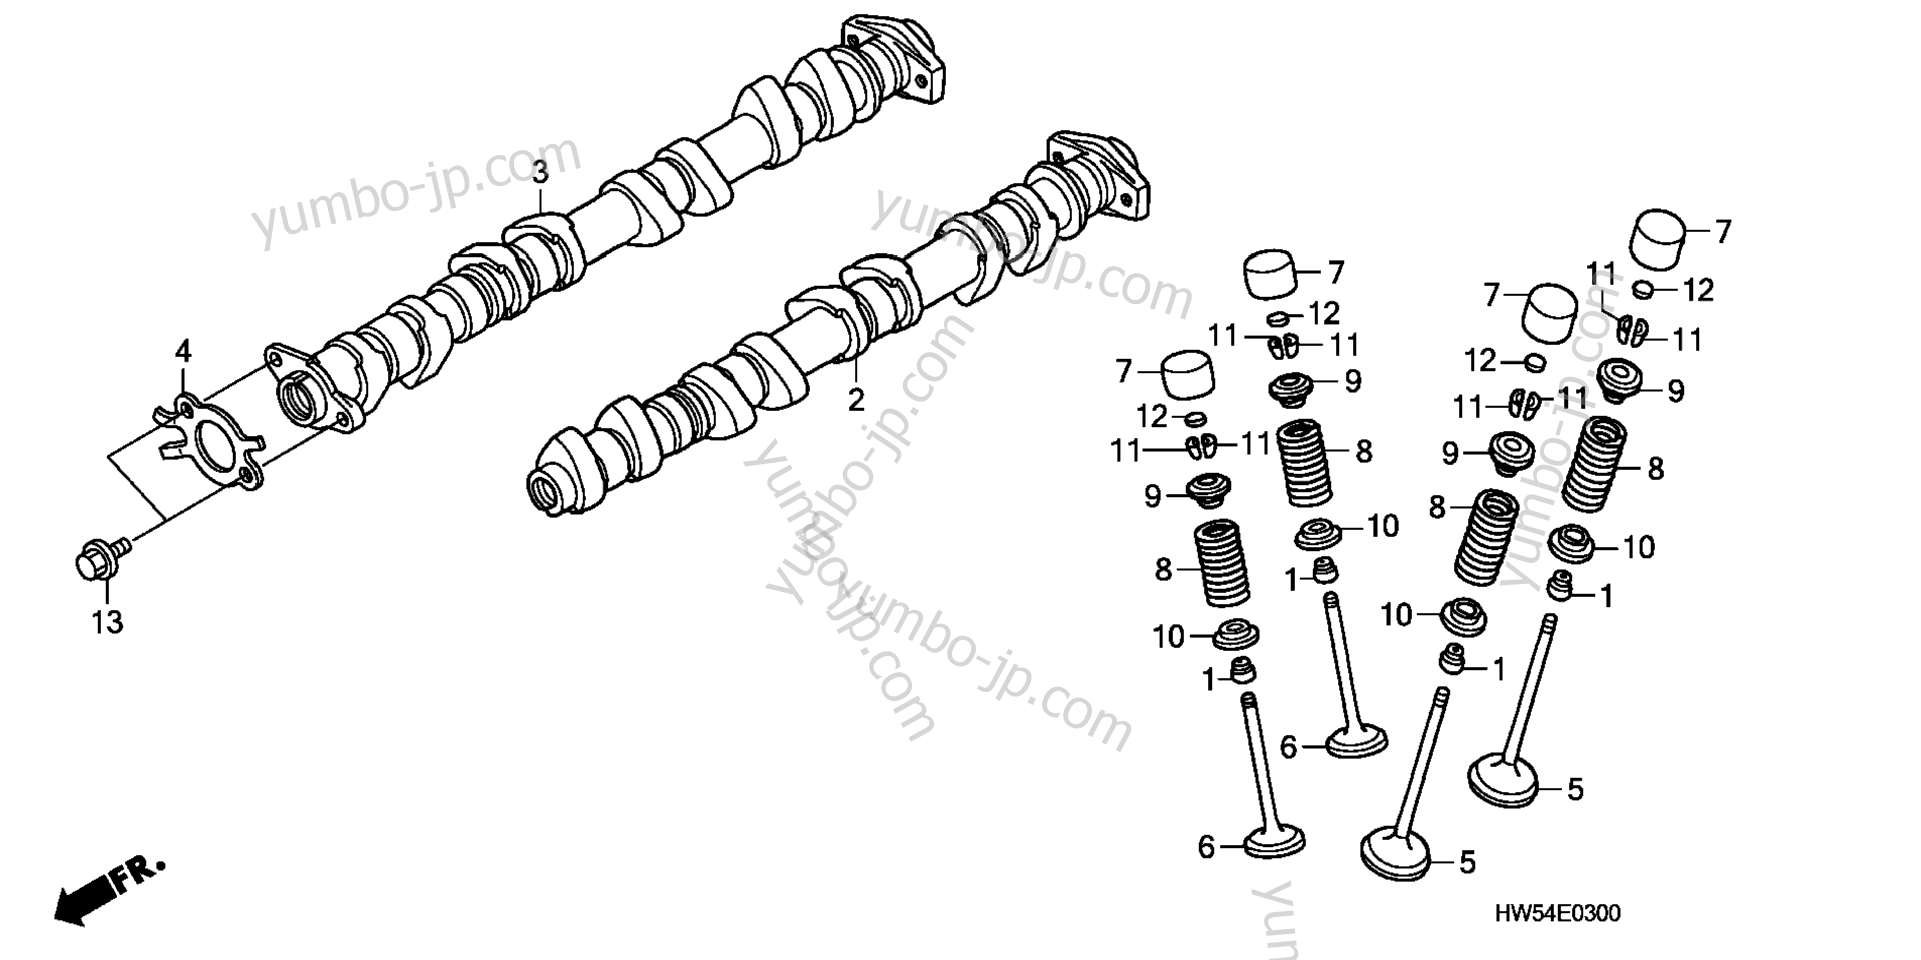 CAMSHAFT / VALVE for watercrafts HONDA ARX1500T3 A 2009 year